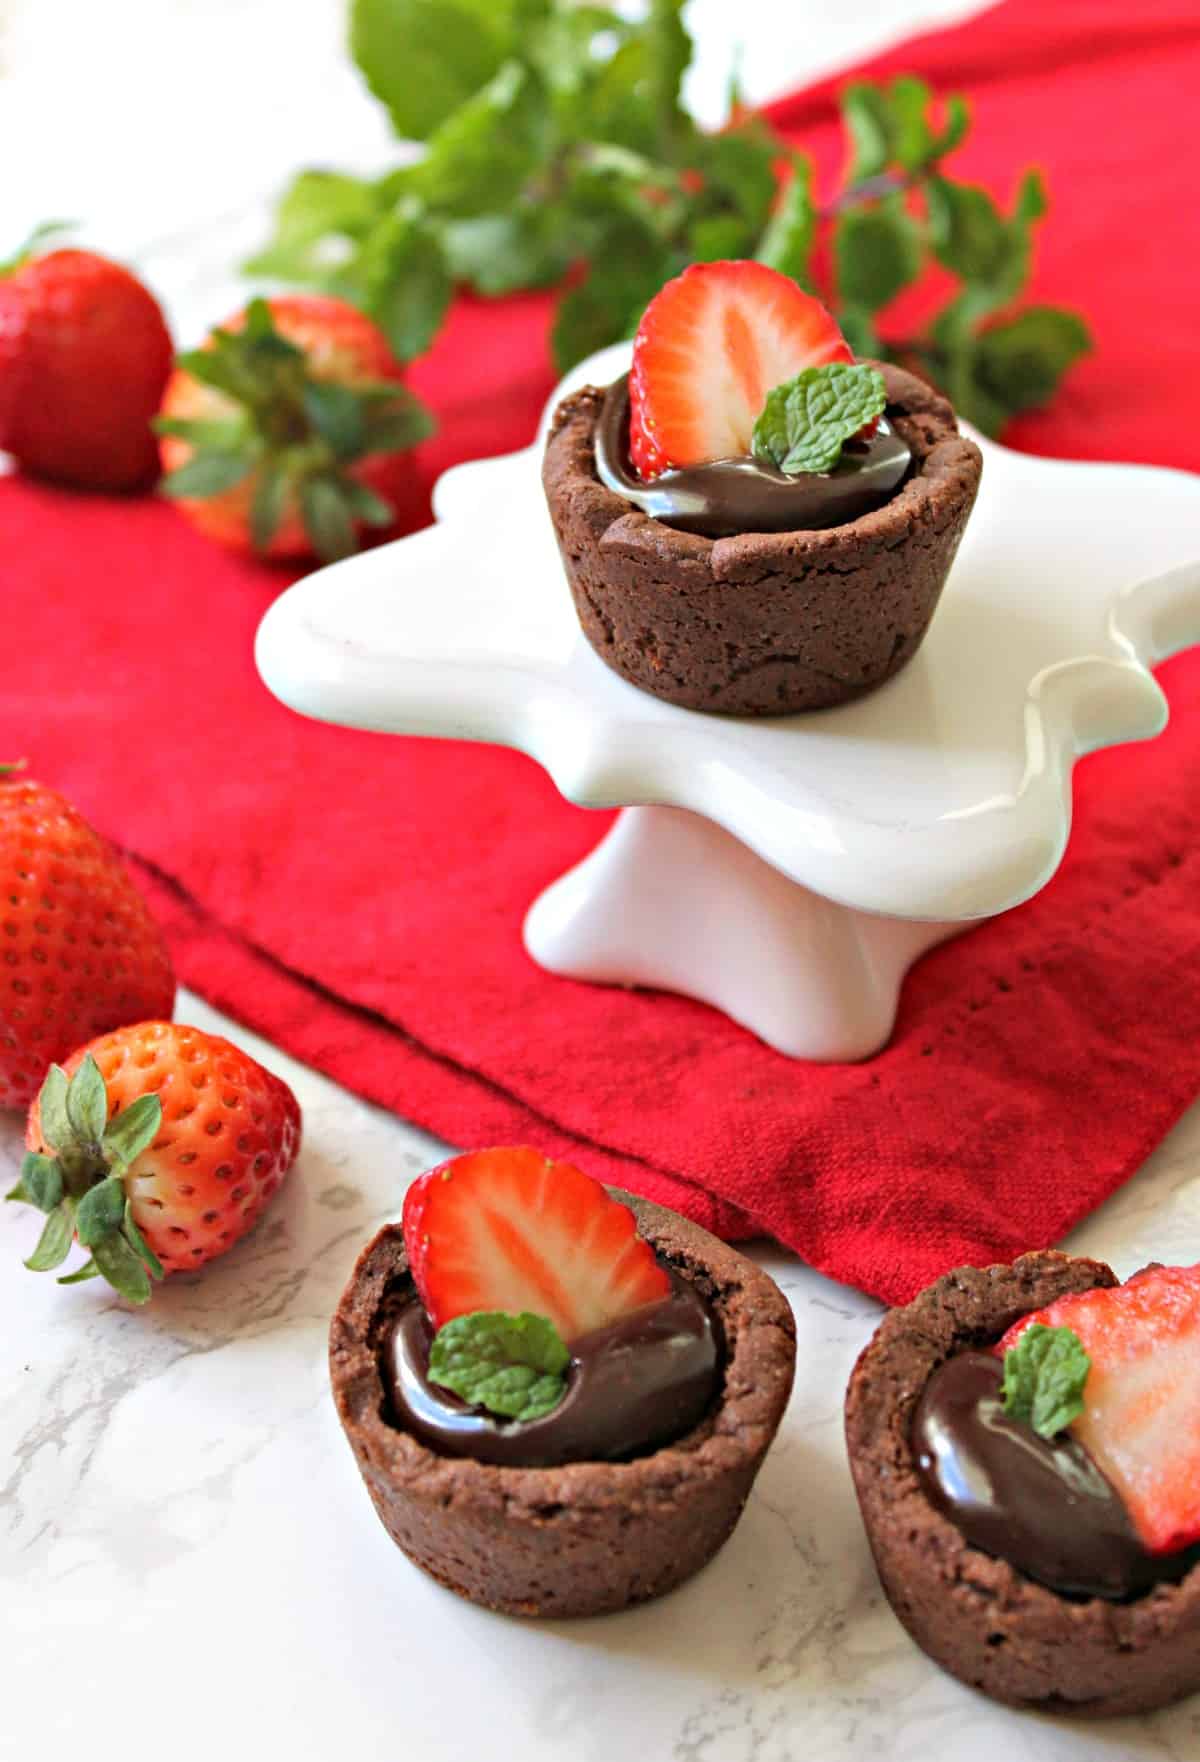 Strawberry & Chocolate Ganache Cookie Cups! Need any easy Valentine's Day treat?  These chocolate cookie "cups" are filled with smooth, creamy chocolate ganache and topped with fresh strawberries for a crowd-pleasing dessert that comes together in no time. 